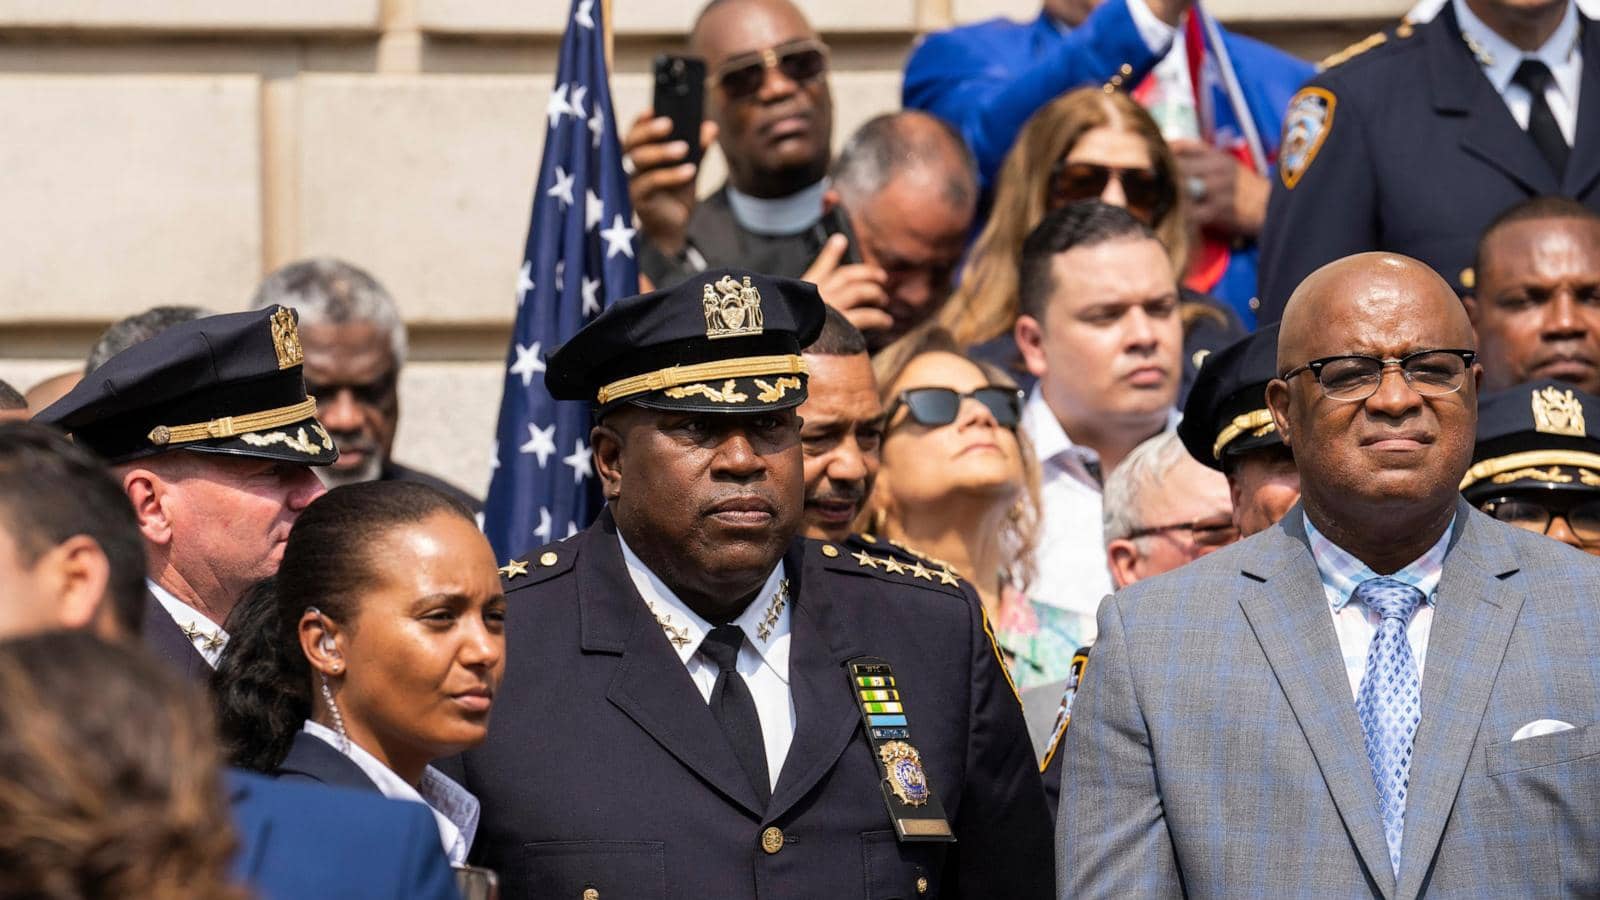 Administrative judge says discipline case against high-ranking NYPD official should be dropped